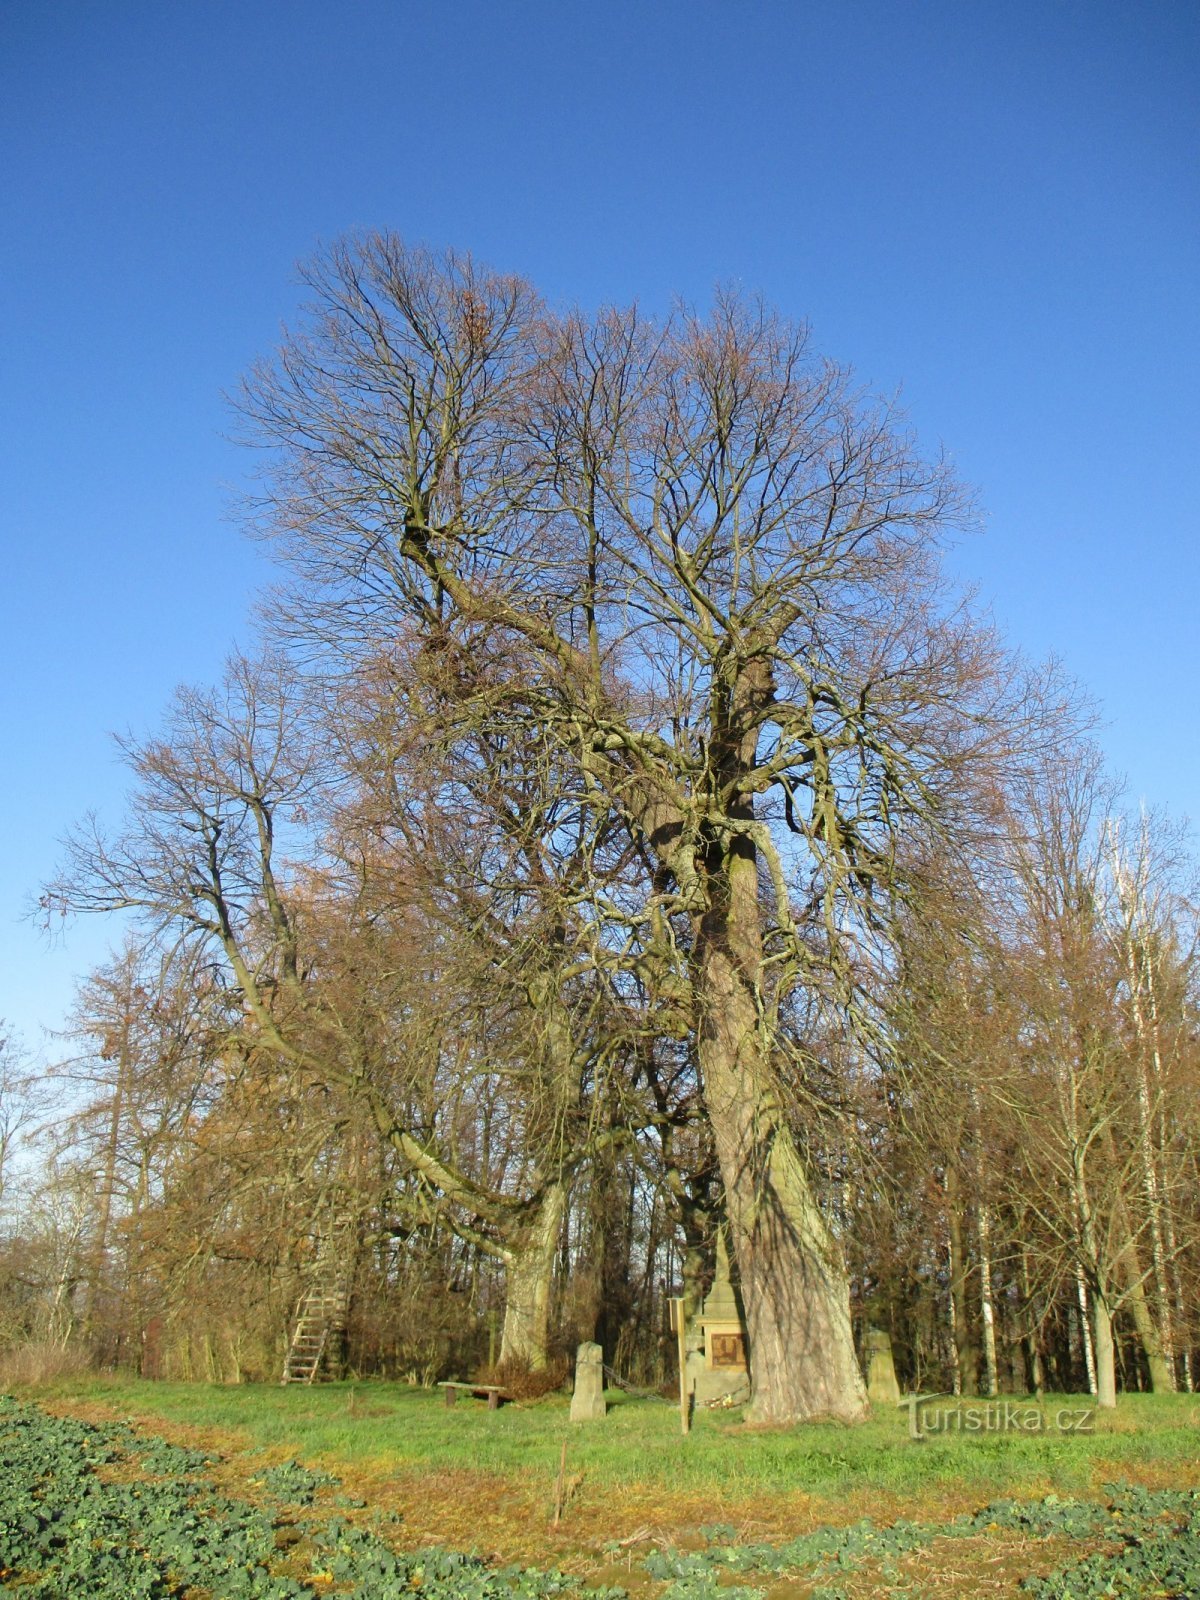 Hoříněves linden trees and the wooded part of the original orchards (Hoříněves, 30.11.2019/XNUMX/XNUMX)